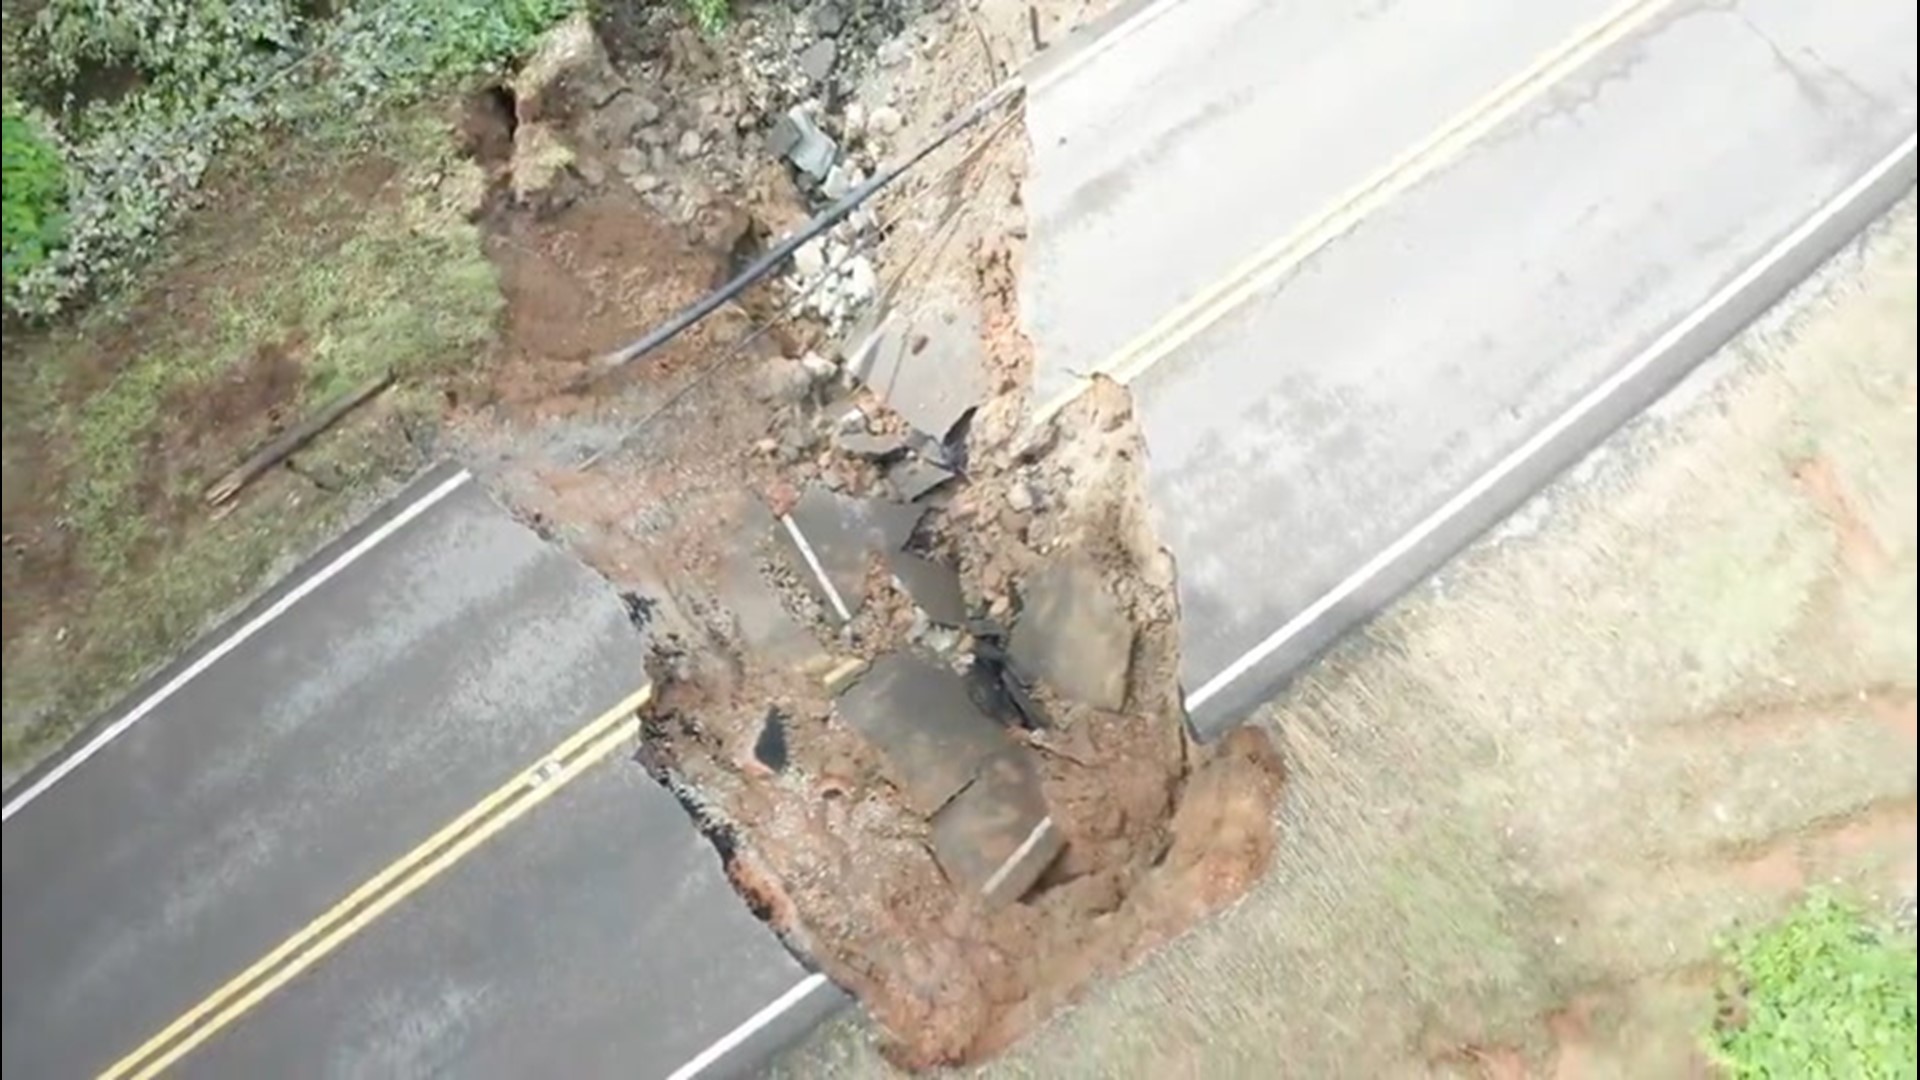 Serious flooding in Jackson, Tennessee, caused Christmasville Road to sink into the earth on July 1. The road is closed between Oakfield and Watson roads.